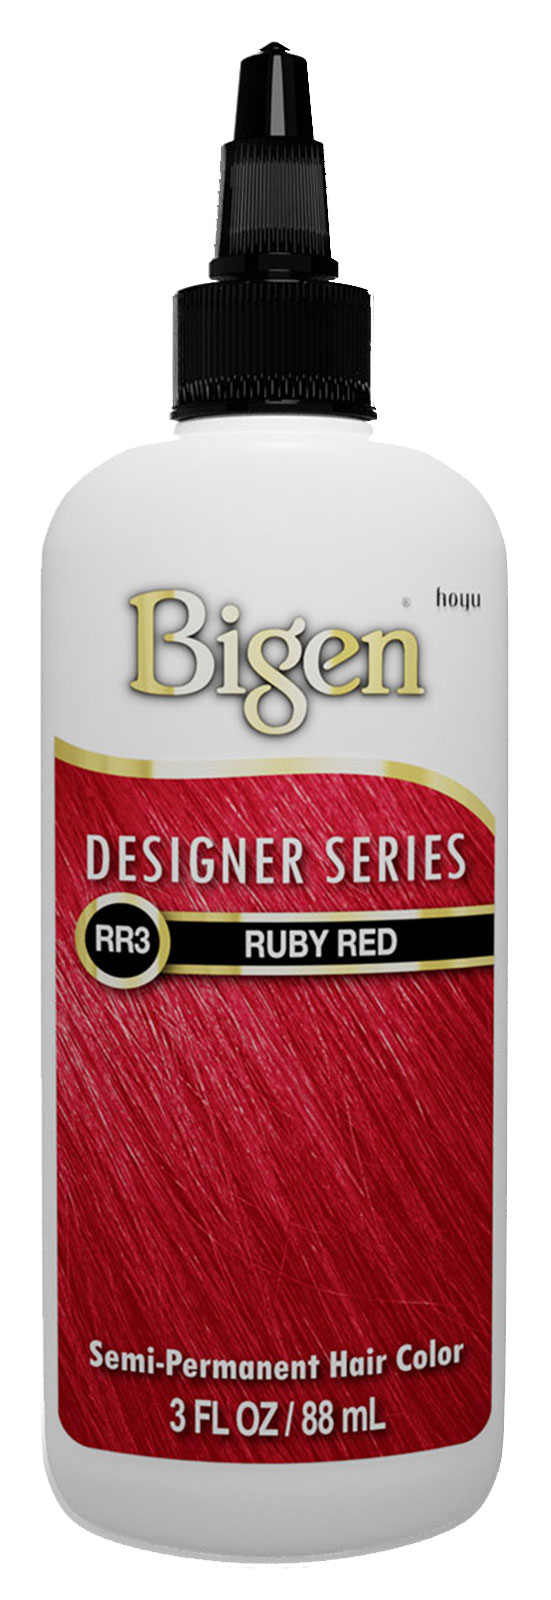 RR3-Ruby Red